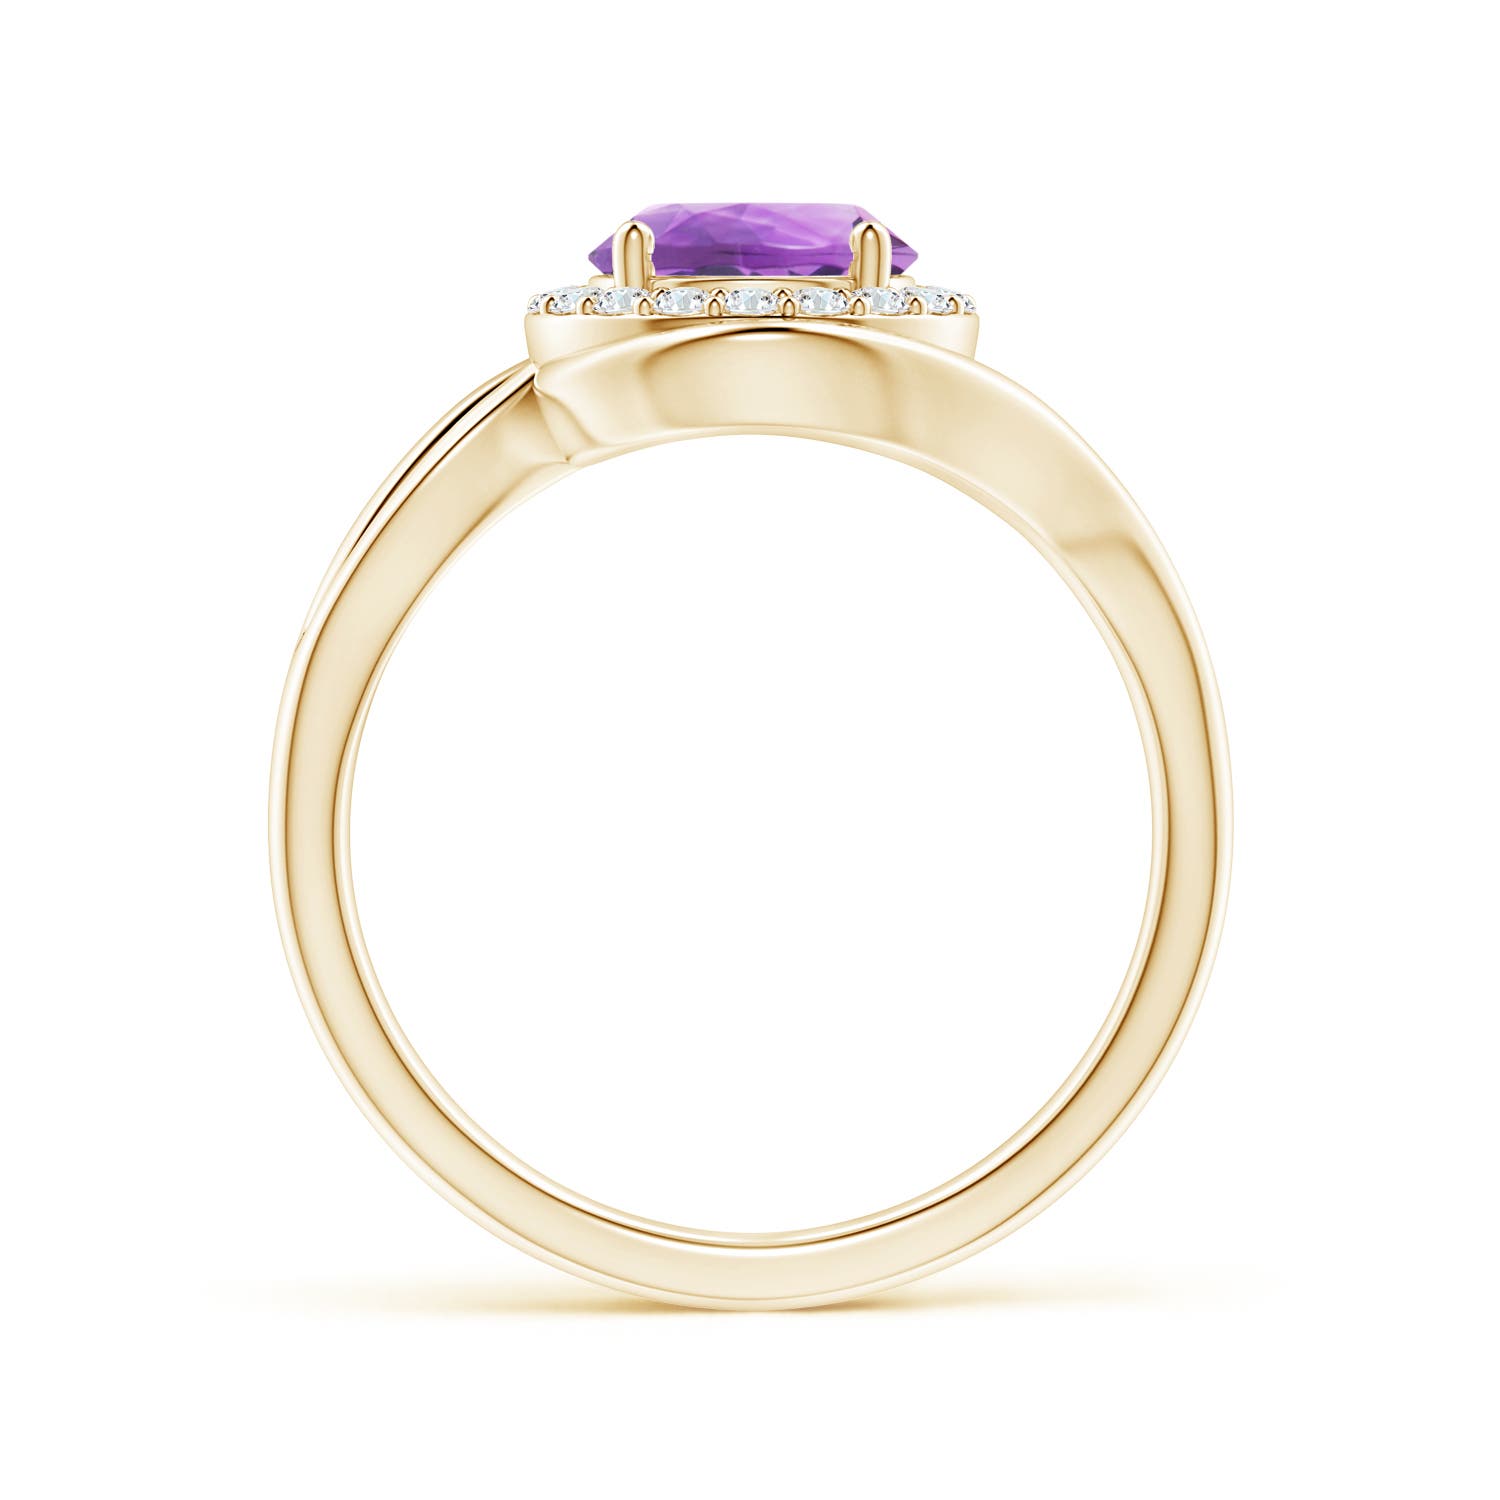 A - Amethyst / 1.33 CT / 14 KT Yellow Gold